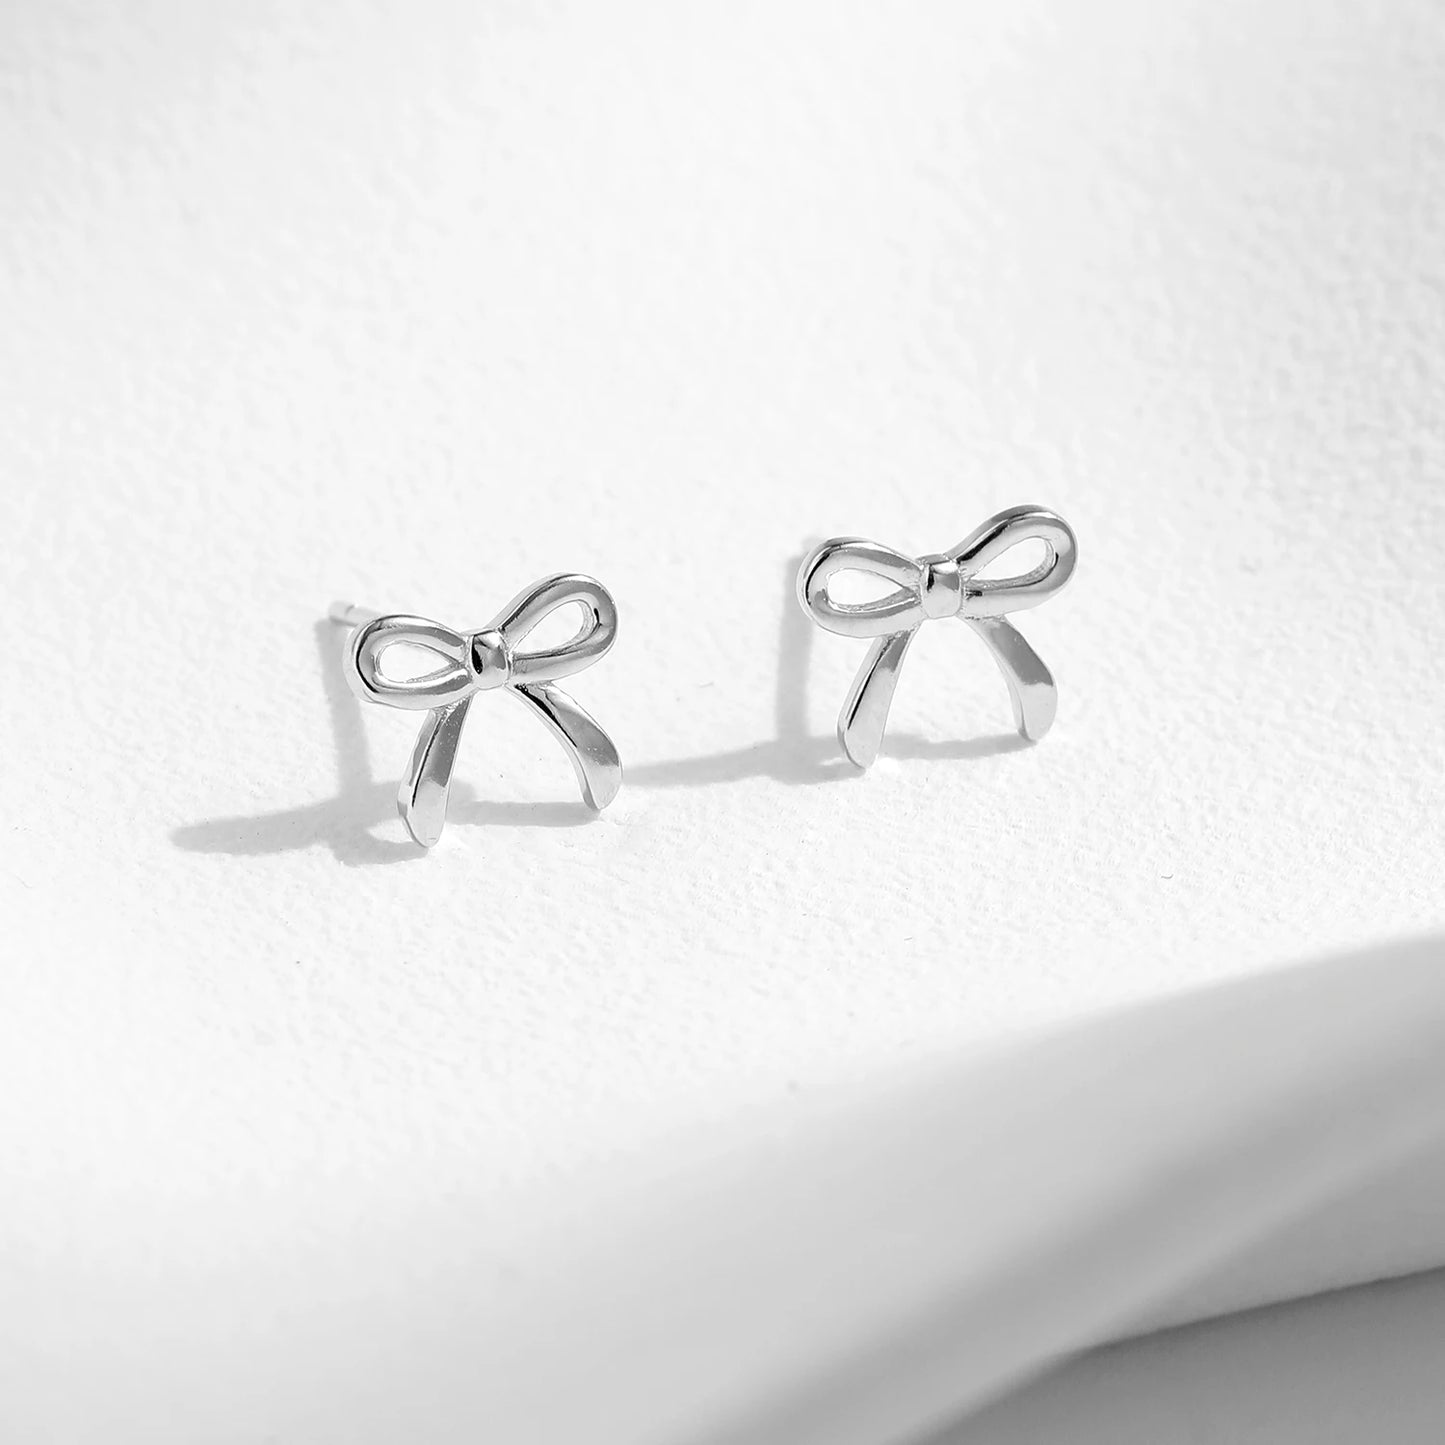 MQ S925 Silver Earrings - Perfect for Women's Fine Jewelry Collection